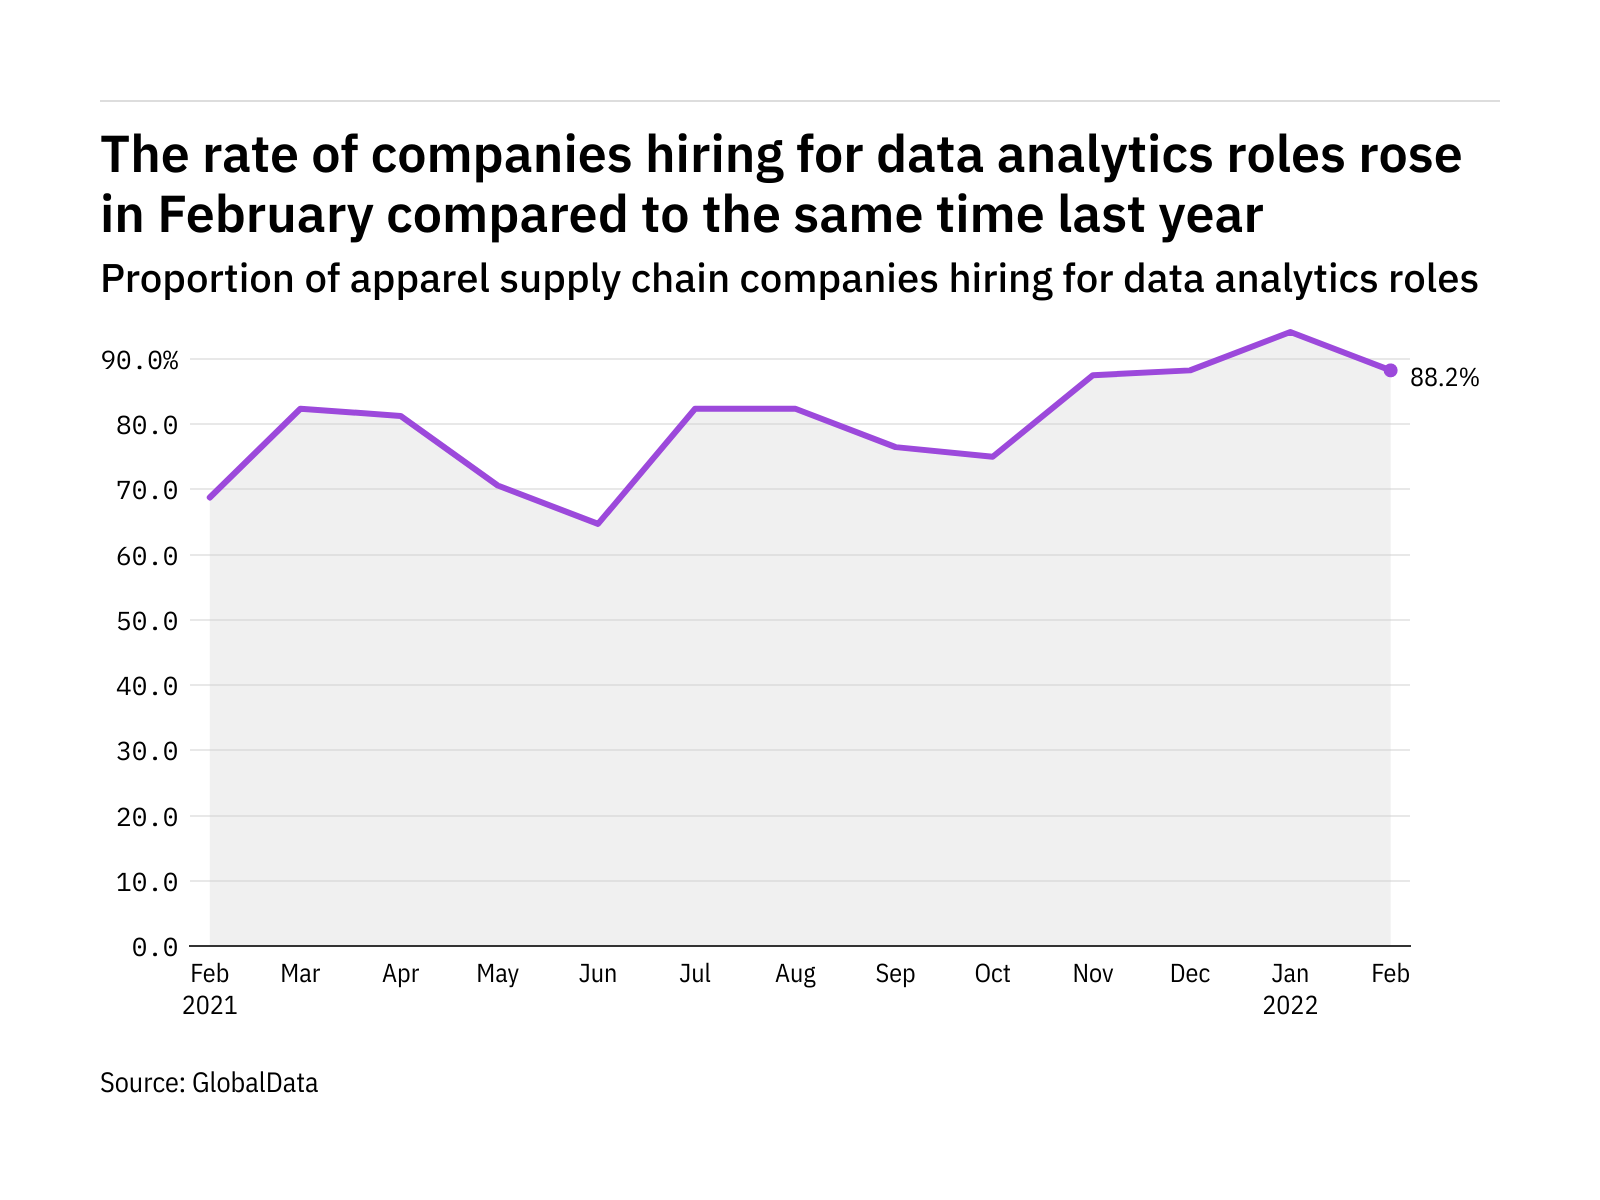 Apparel industry's data analytics hiring levels rose in February 2022